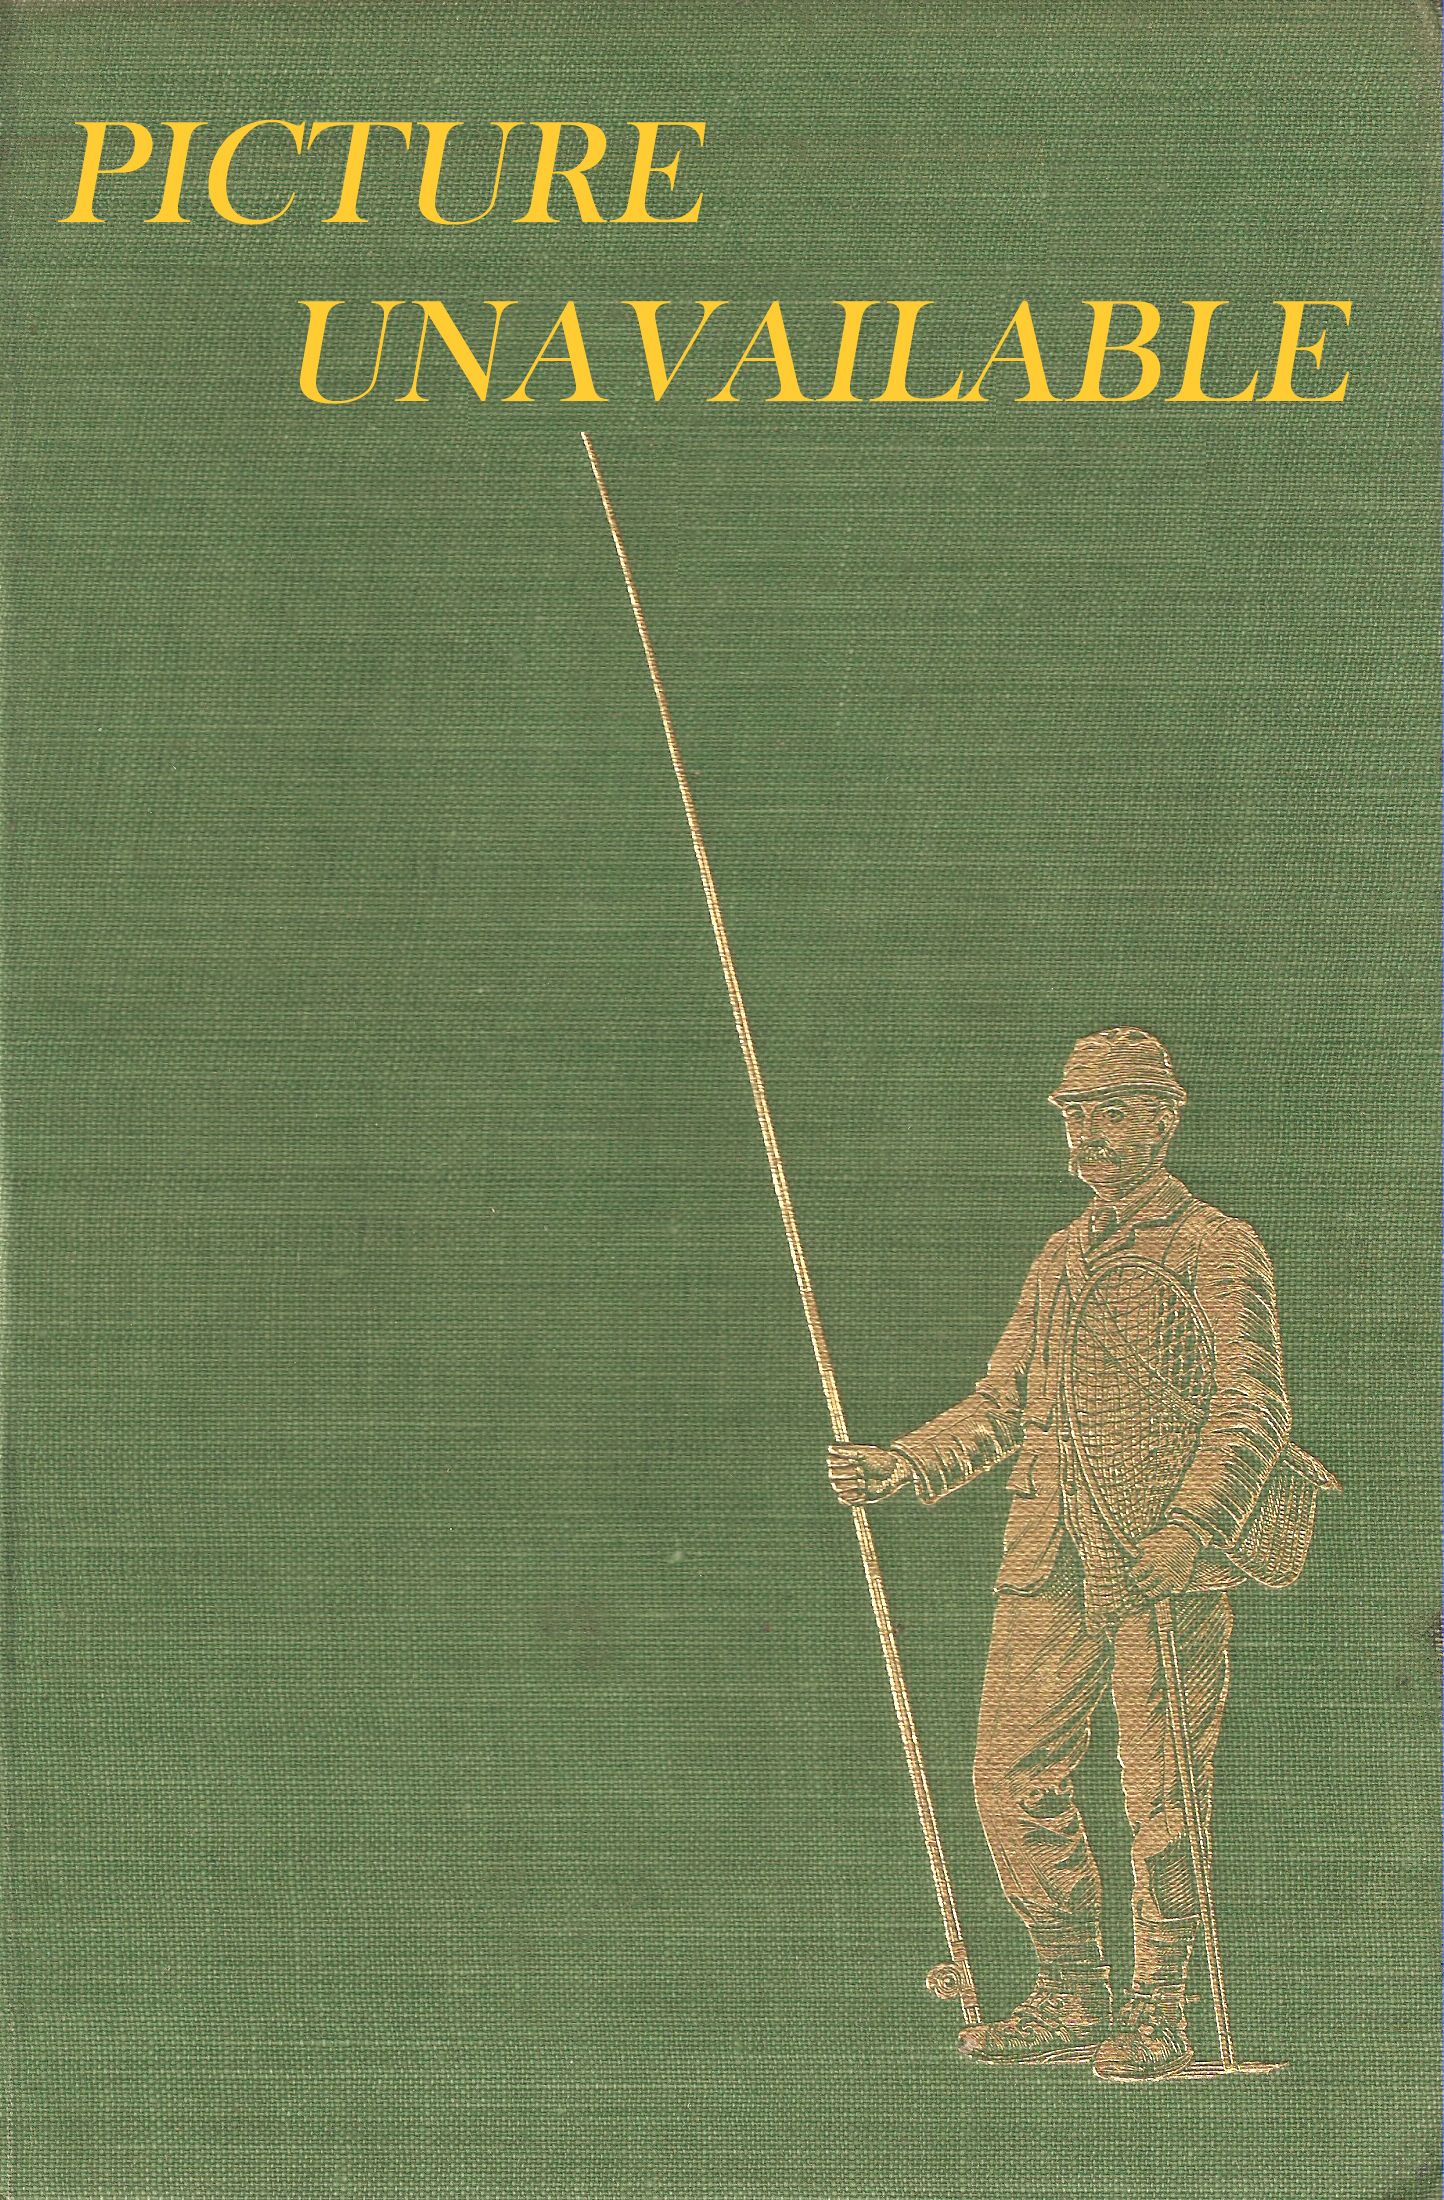 THE BRITISH ANGLER'S MANUAL, OR, THE ART OF ANGLING IN ENGLAND, SCOTLAND,  WALES AND IRELAND: With some account of the principal rivers, lakes and  trout streams, in the United Kingdom... By T.C. Hofland, Esq.